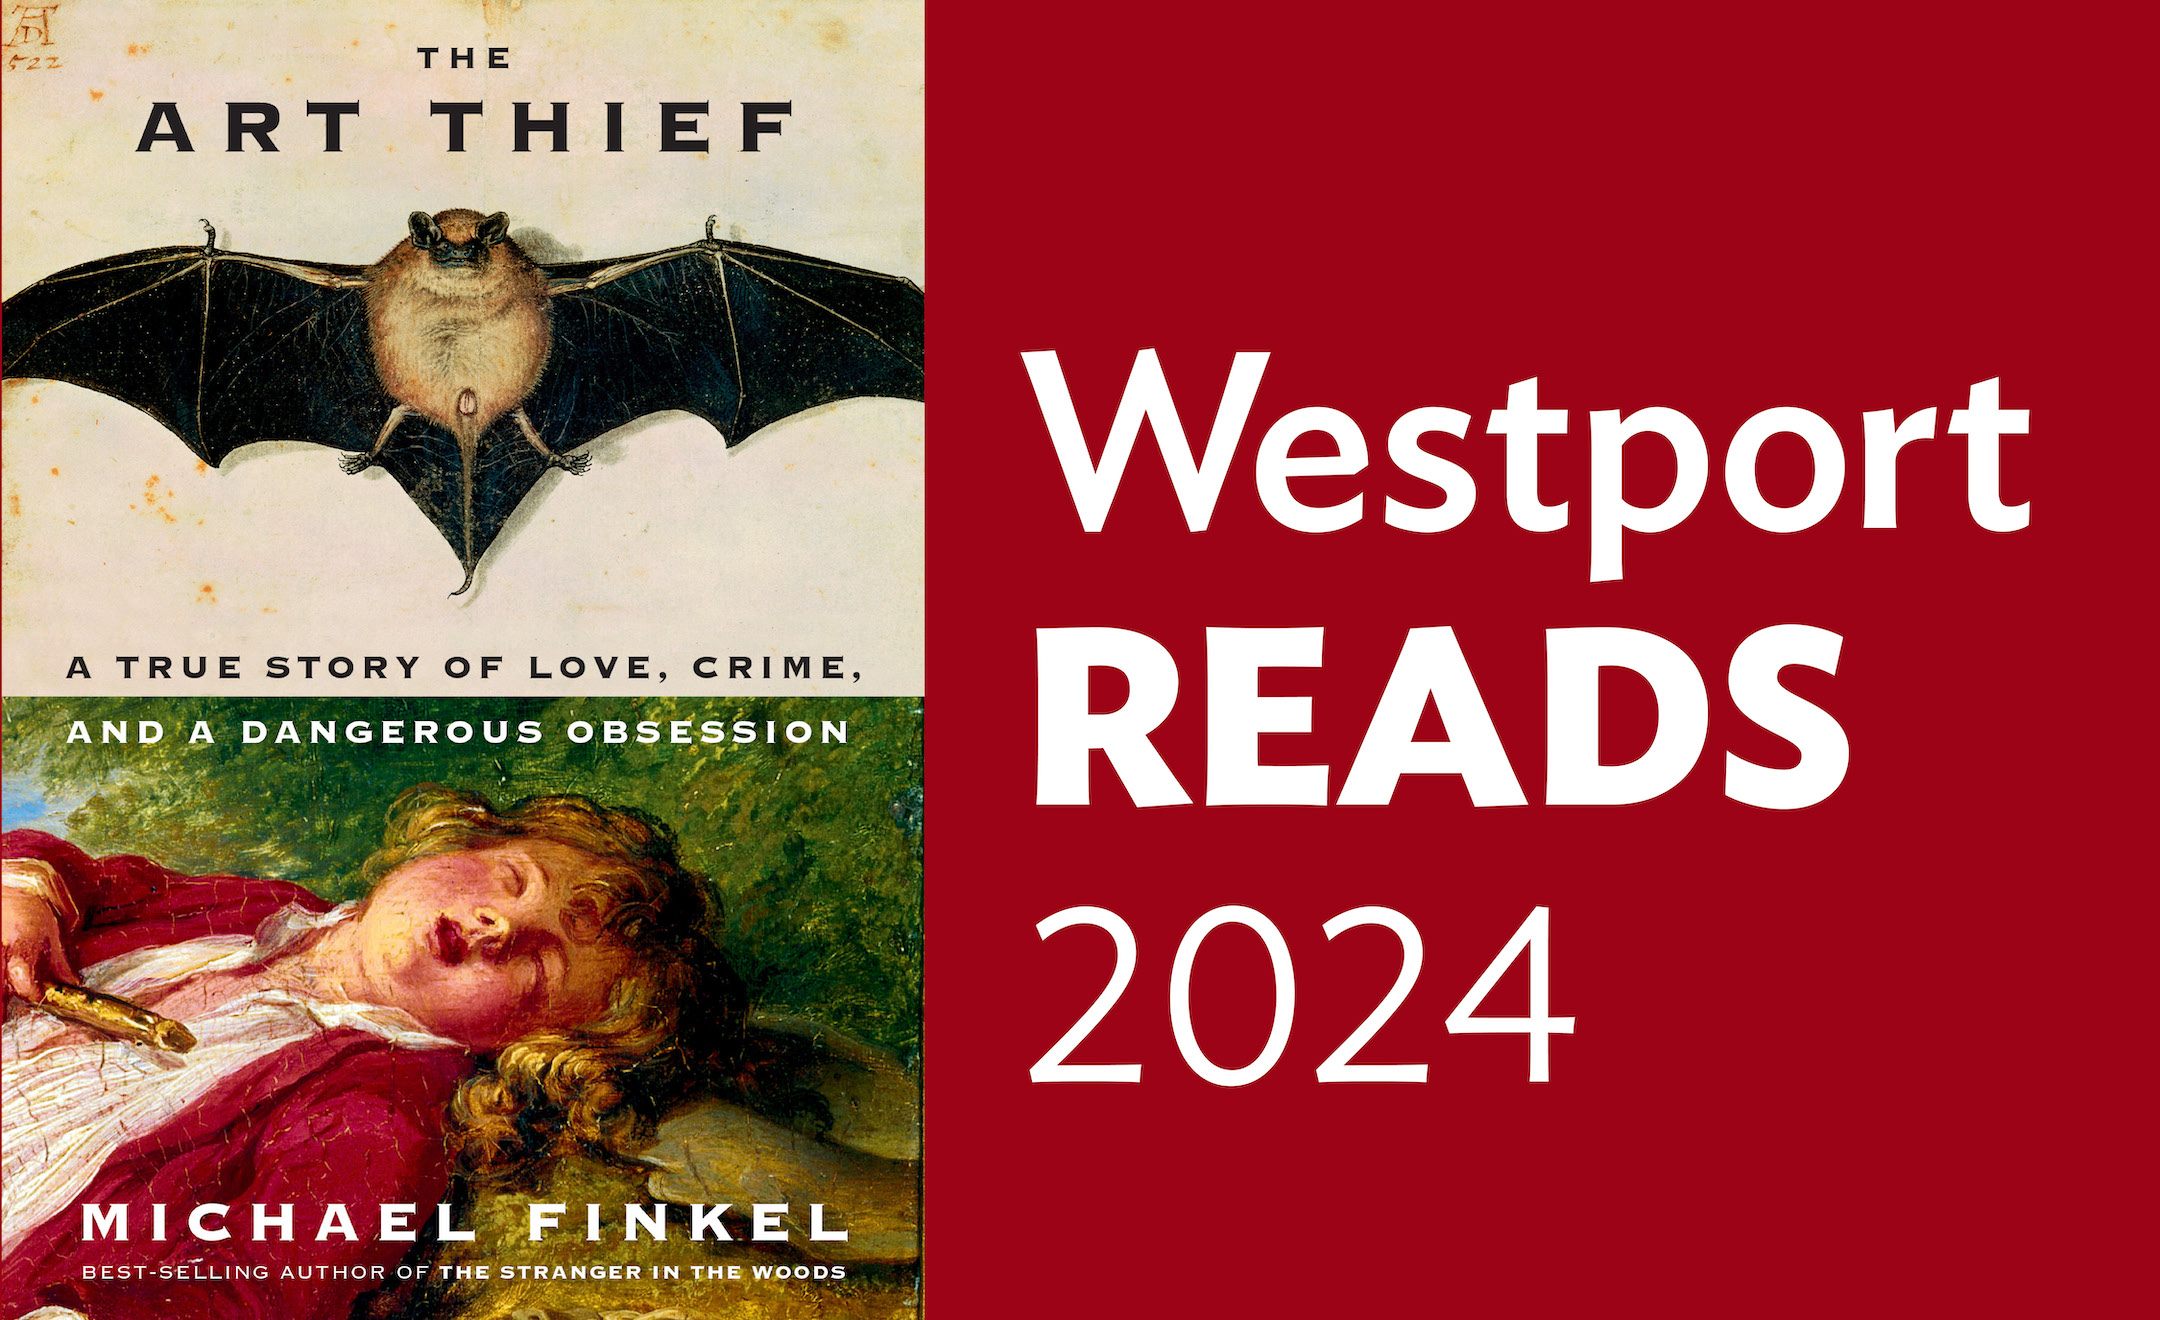 Logo of WestportREADS 2024 with cover of THE ART THIEF by Michael Finkel